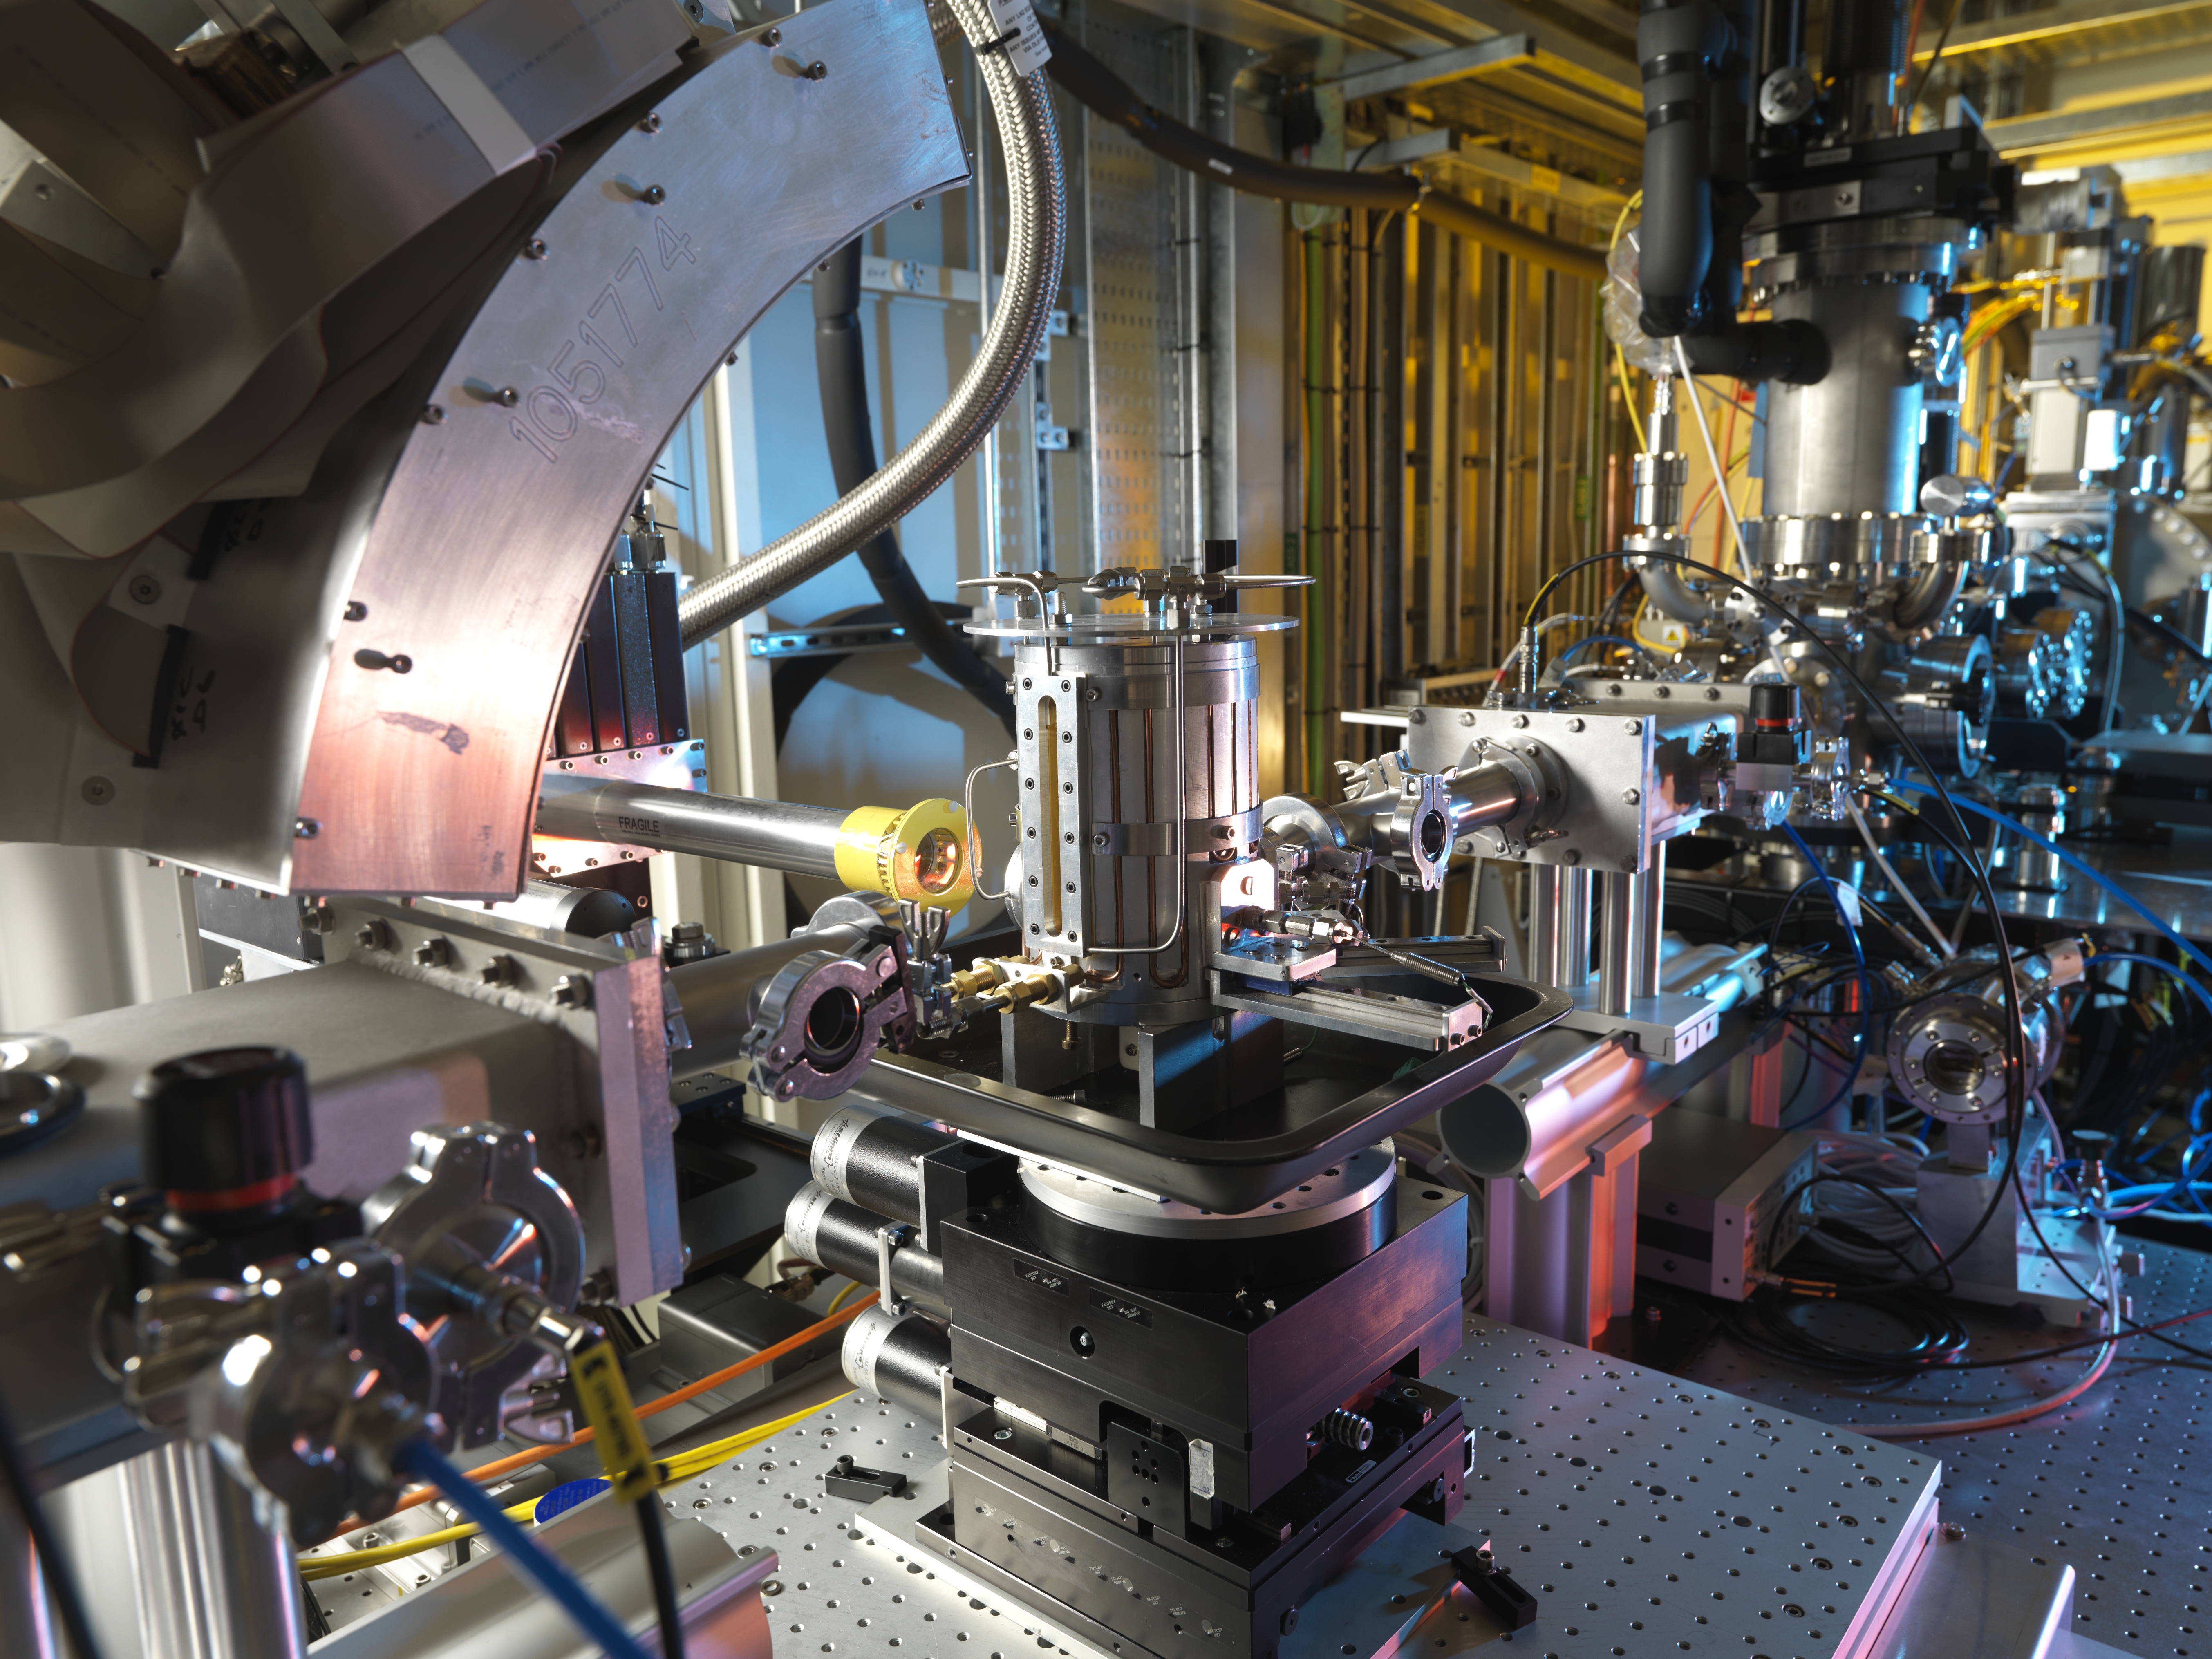 The Experimental Hutch of Beamline B18 at Diamond Light Source. Copyright of Diamond Light Source Ltd.